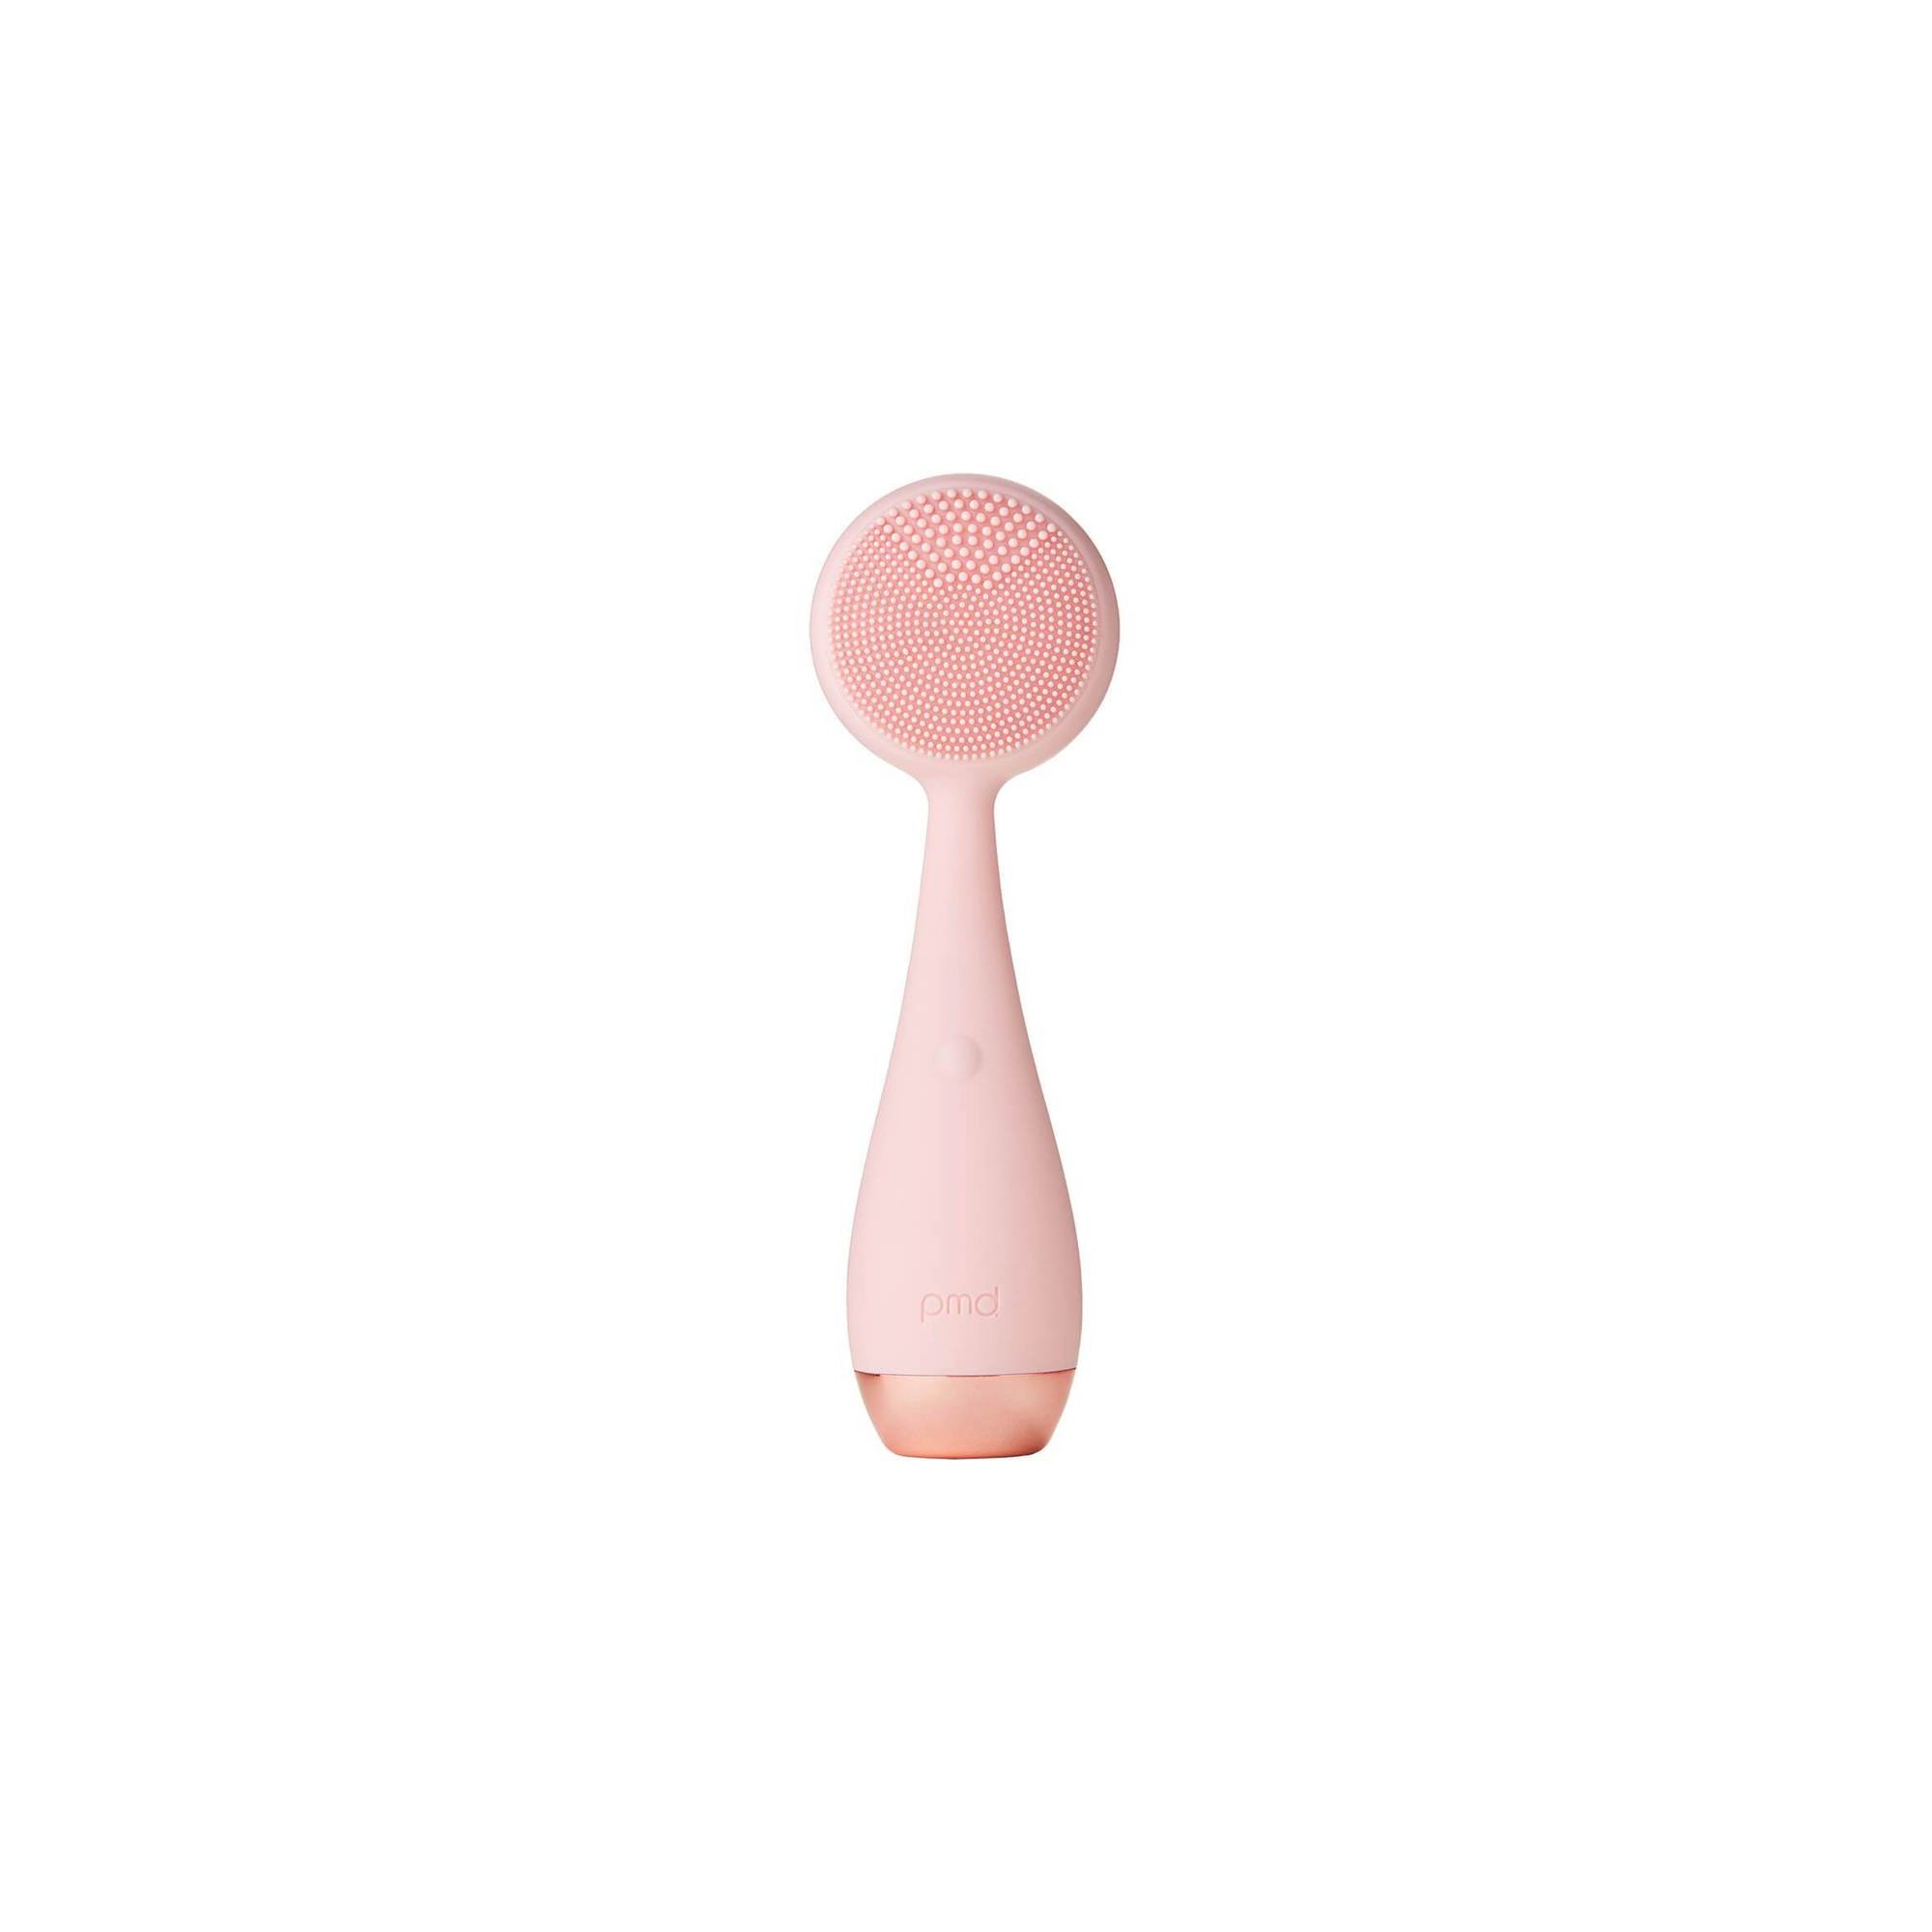 PMD Clean Smart Facial Cleansing Device Blush